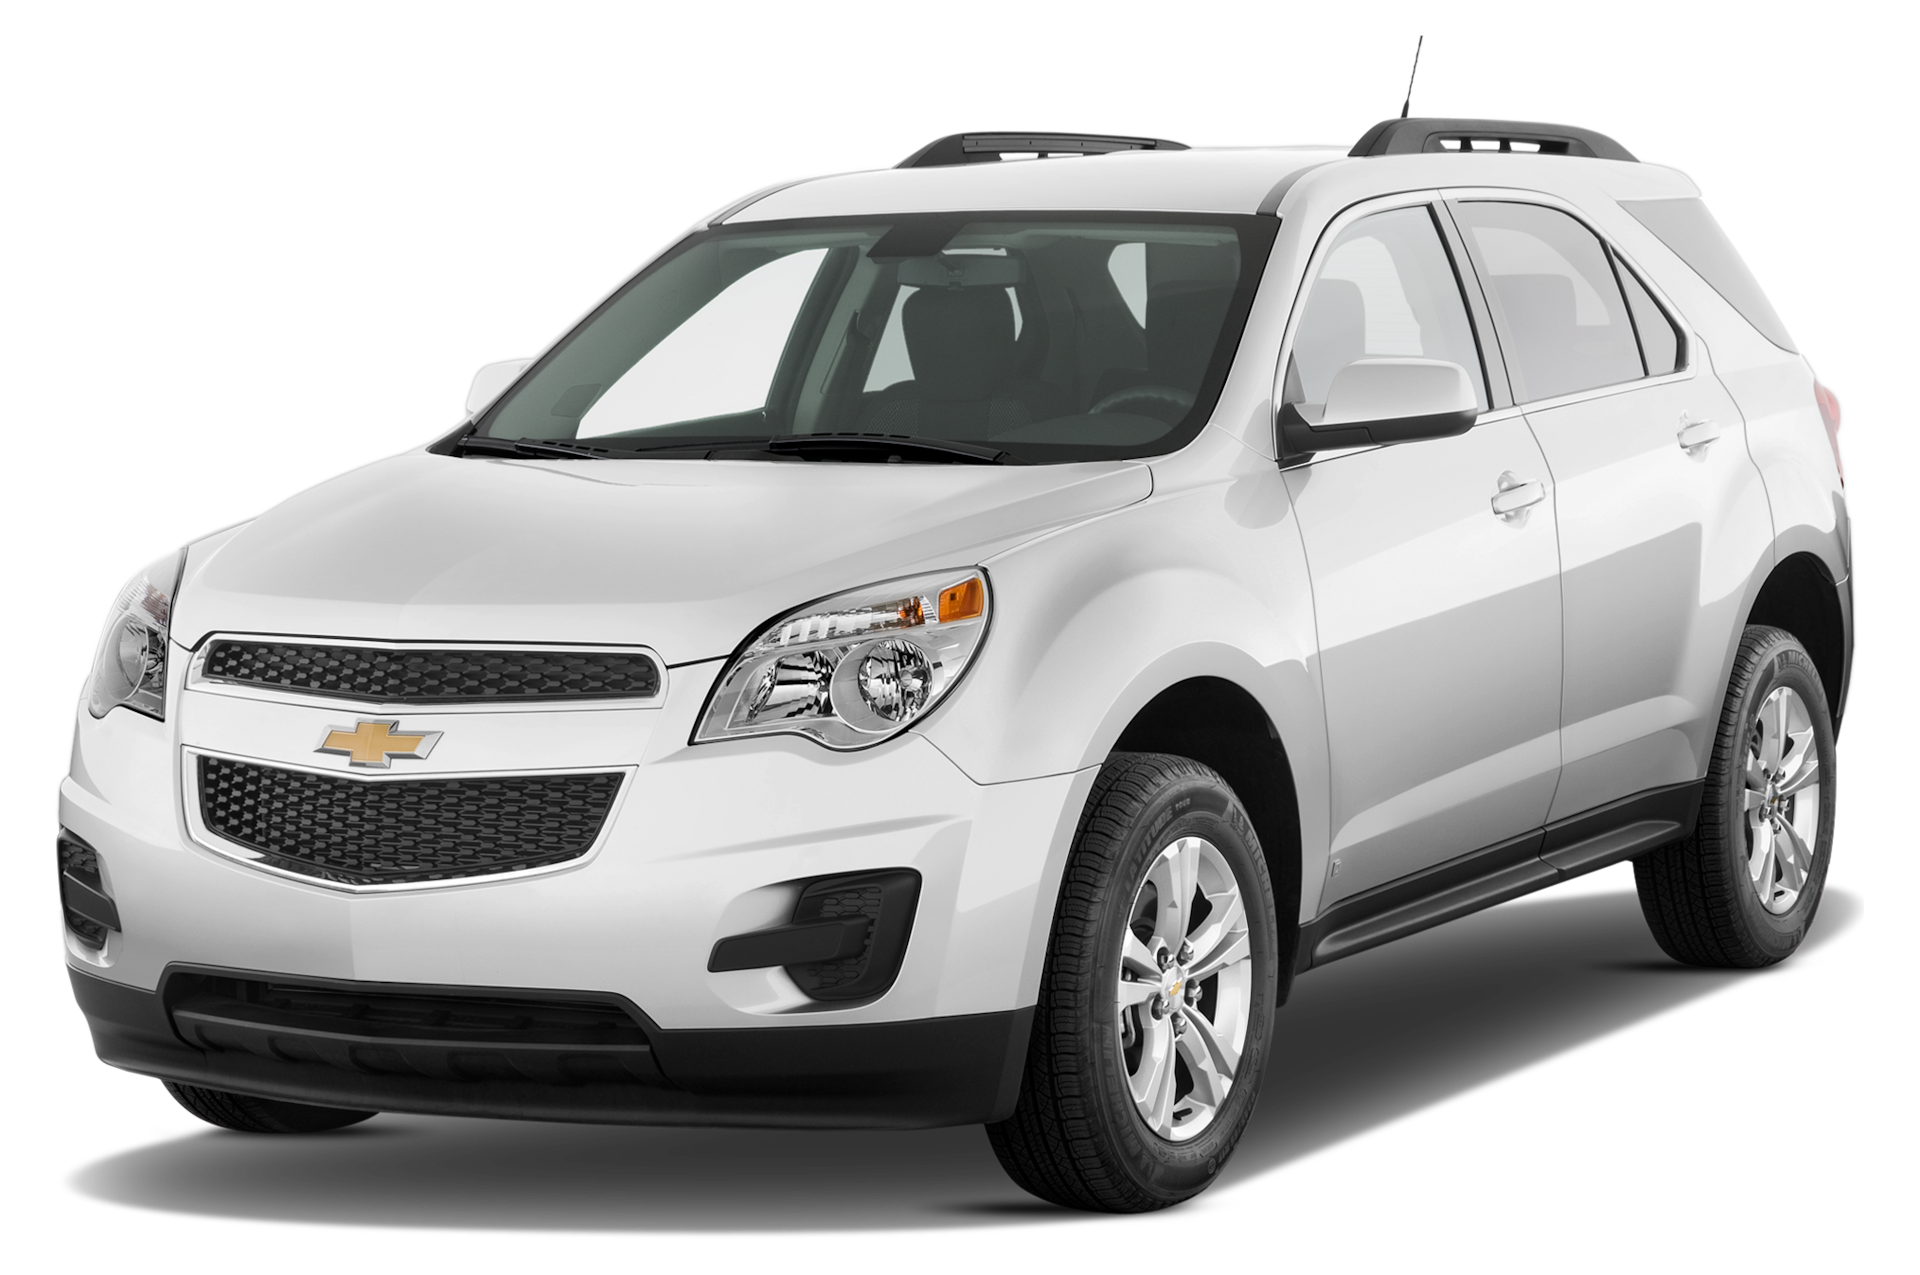 2015 Chevrolet Equinox Prices, Reviews, and Photos - MotorTrend